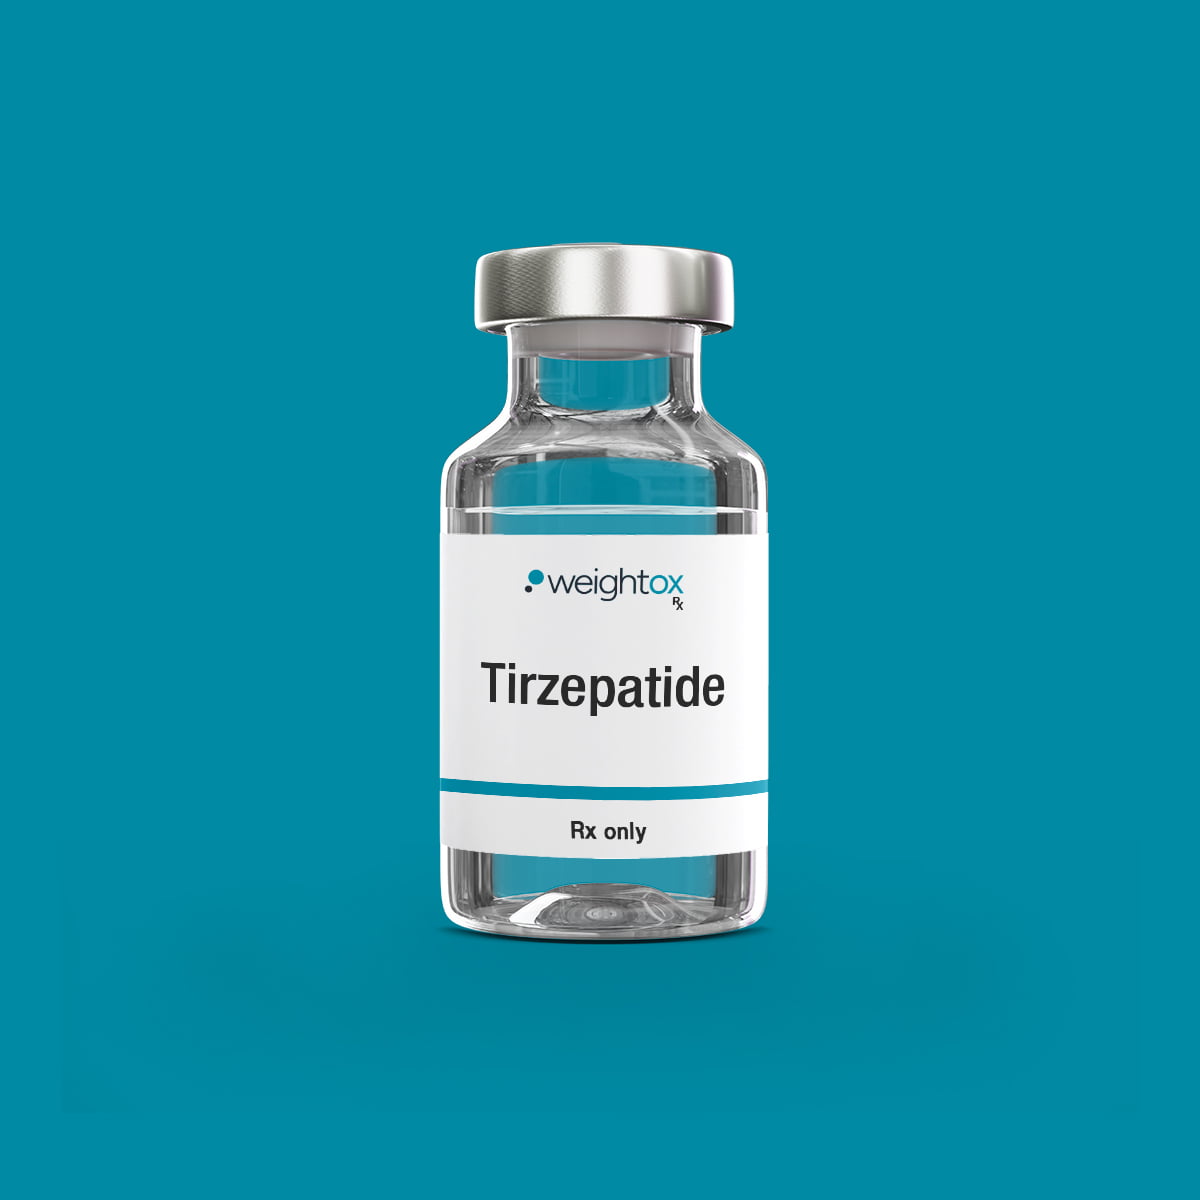 Weightox Rx offers Tirzepatide injections for advanced weight loss, enhancing health outcomes.